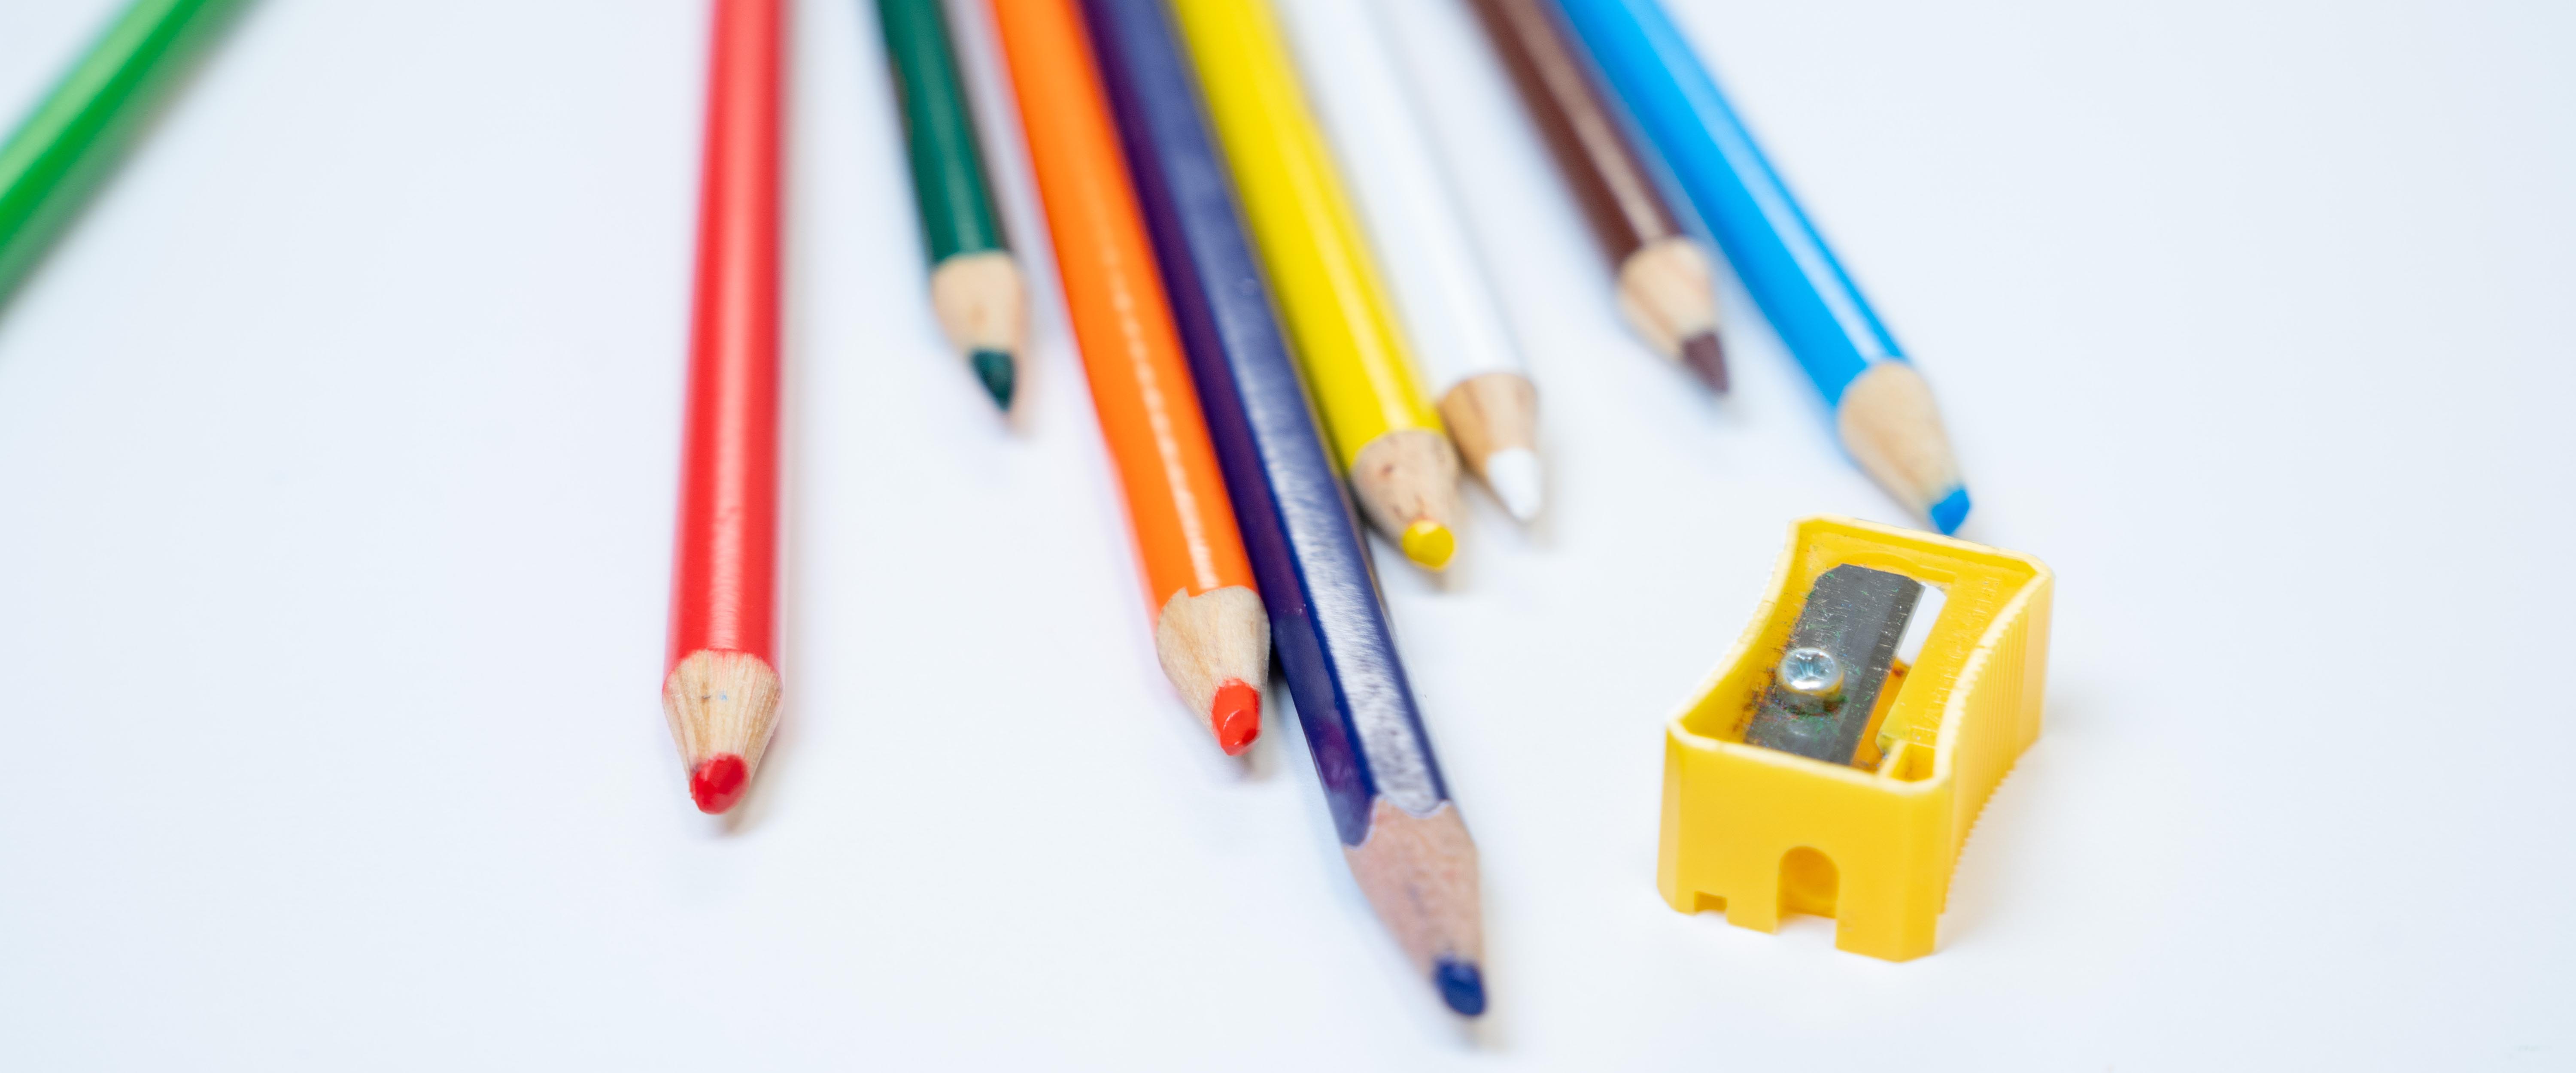 Close up of colored pencils and a pencil sharpener on a white background